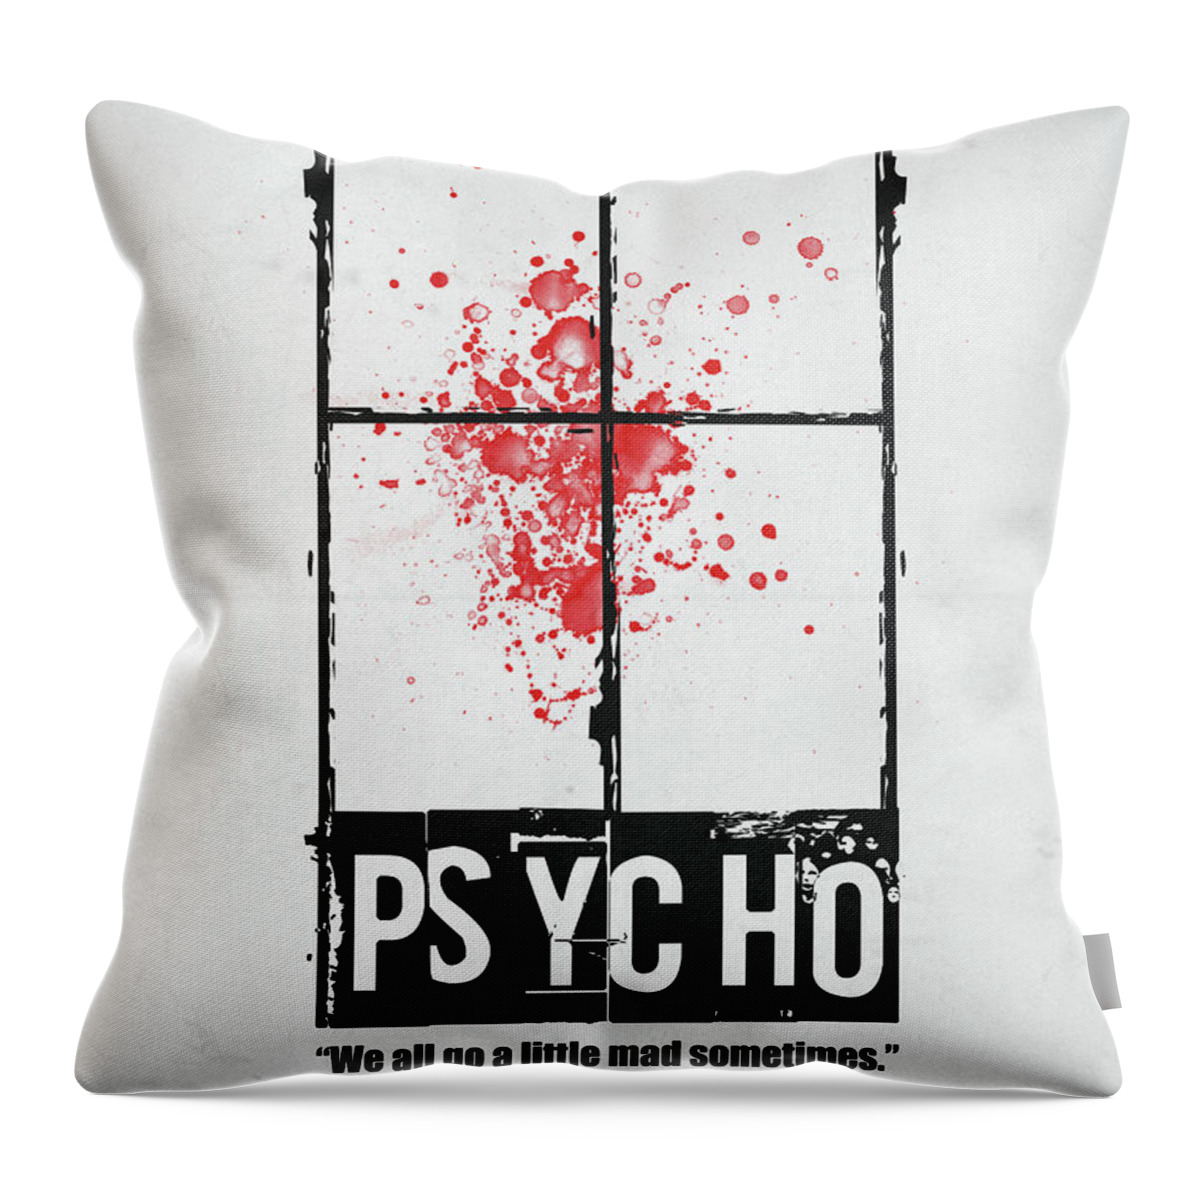 Psycho Throw Pillow featuring the digital art We All Go A Little Mad by Naxart Studio